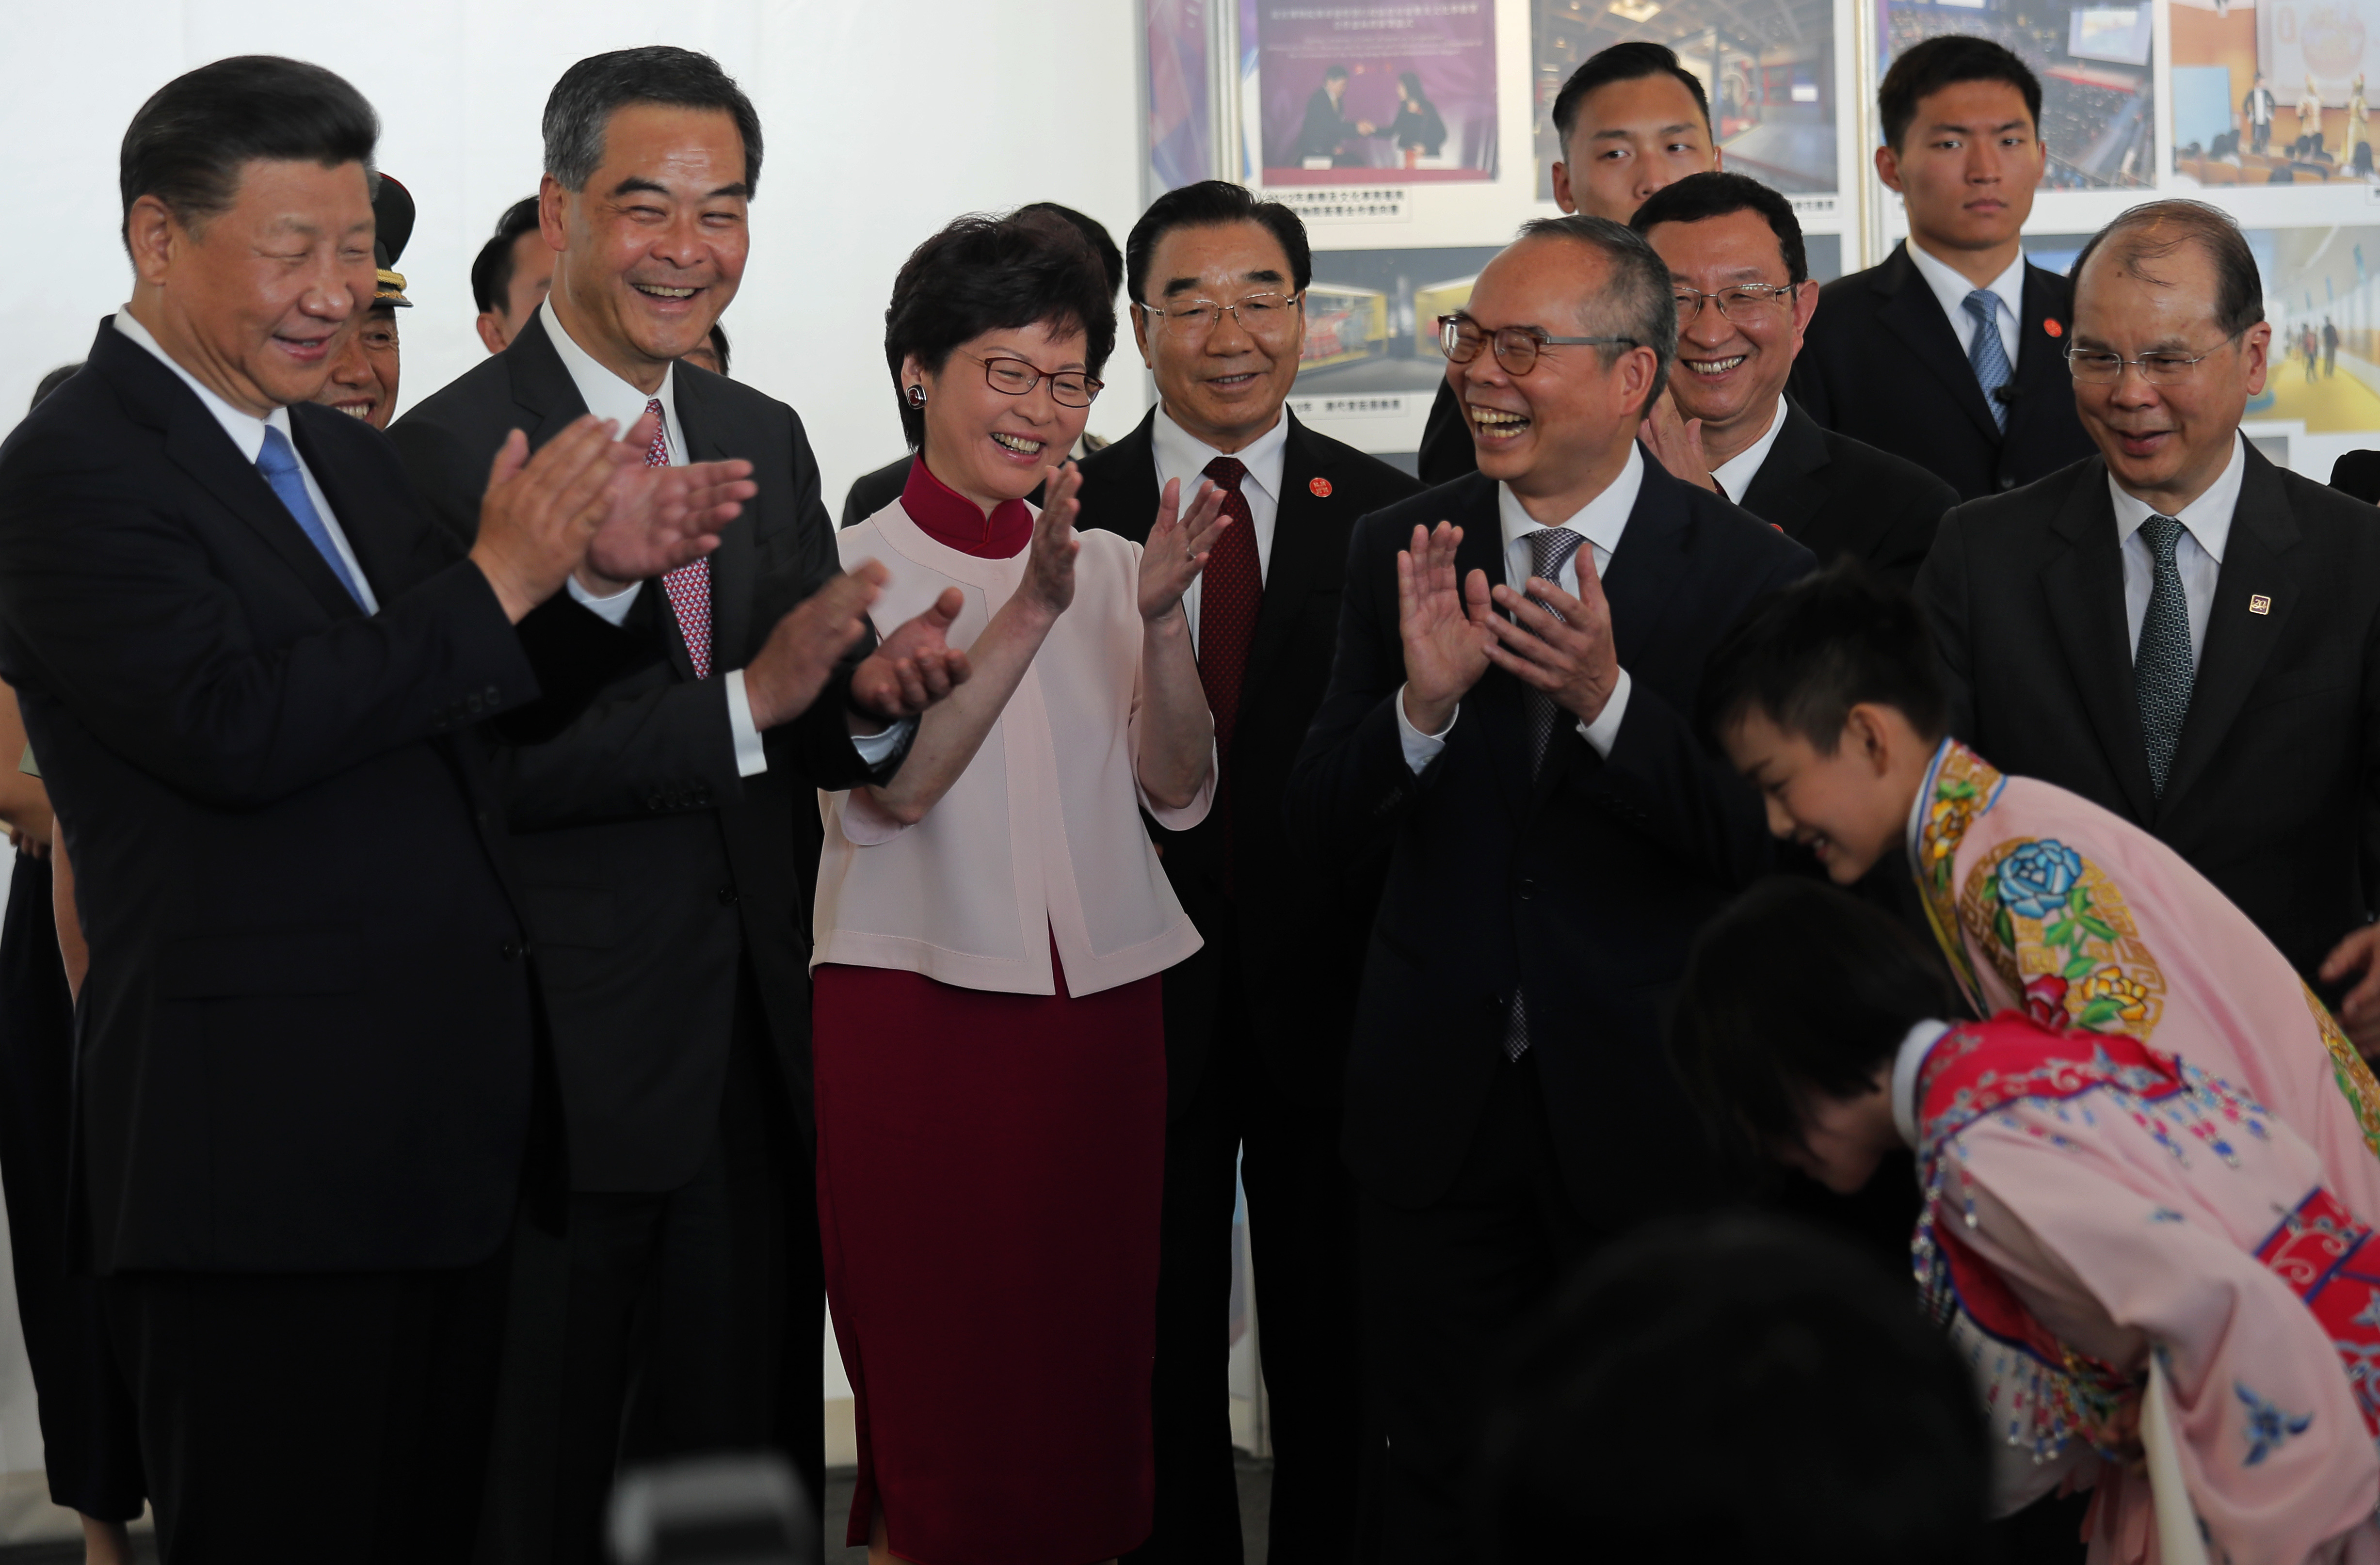 Chinese President Xi Jinping, left, Hong Kong Chief Executive Leung Chun-ying, second left, and Chief Executive-elect Carrie Lam, third left, applaud after watching two young Chinese opera performers during a visit to Hong Kong's West Kowloon district Thursday, June 29, 2017, the site of a controversial high speed cross-border rail terminus. Pro-democracy supporters fear that a plan to station mainland Chinese immigration agents in the terminal to check passengers departing on trains for the mainland is an erosion of Hong Kong's 